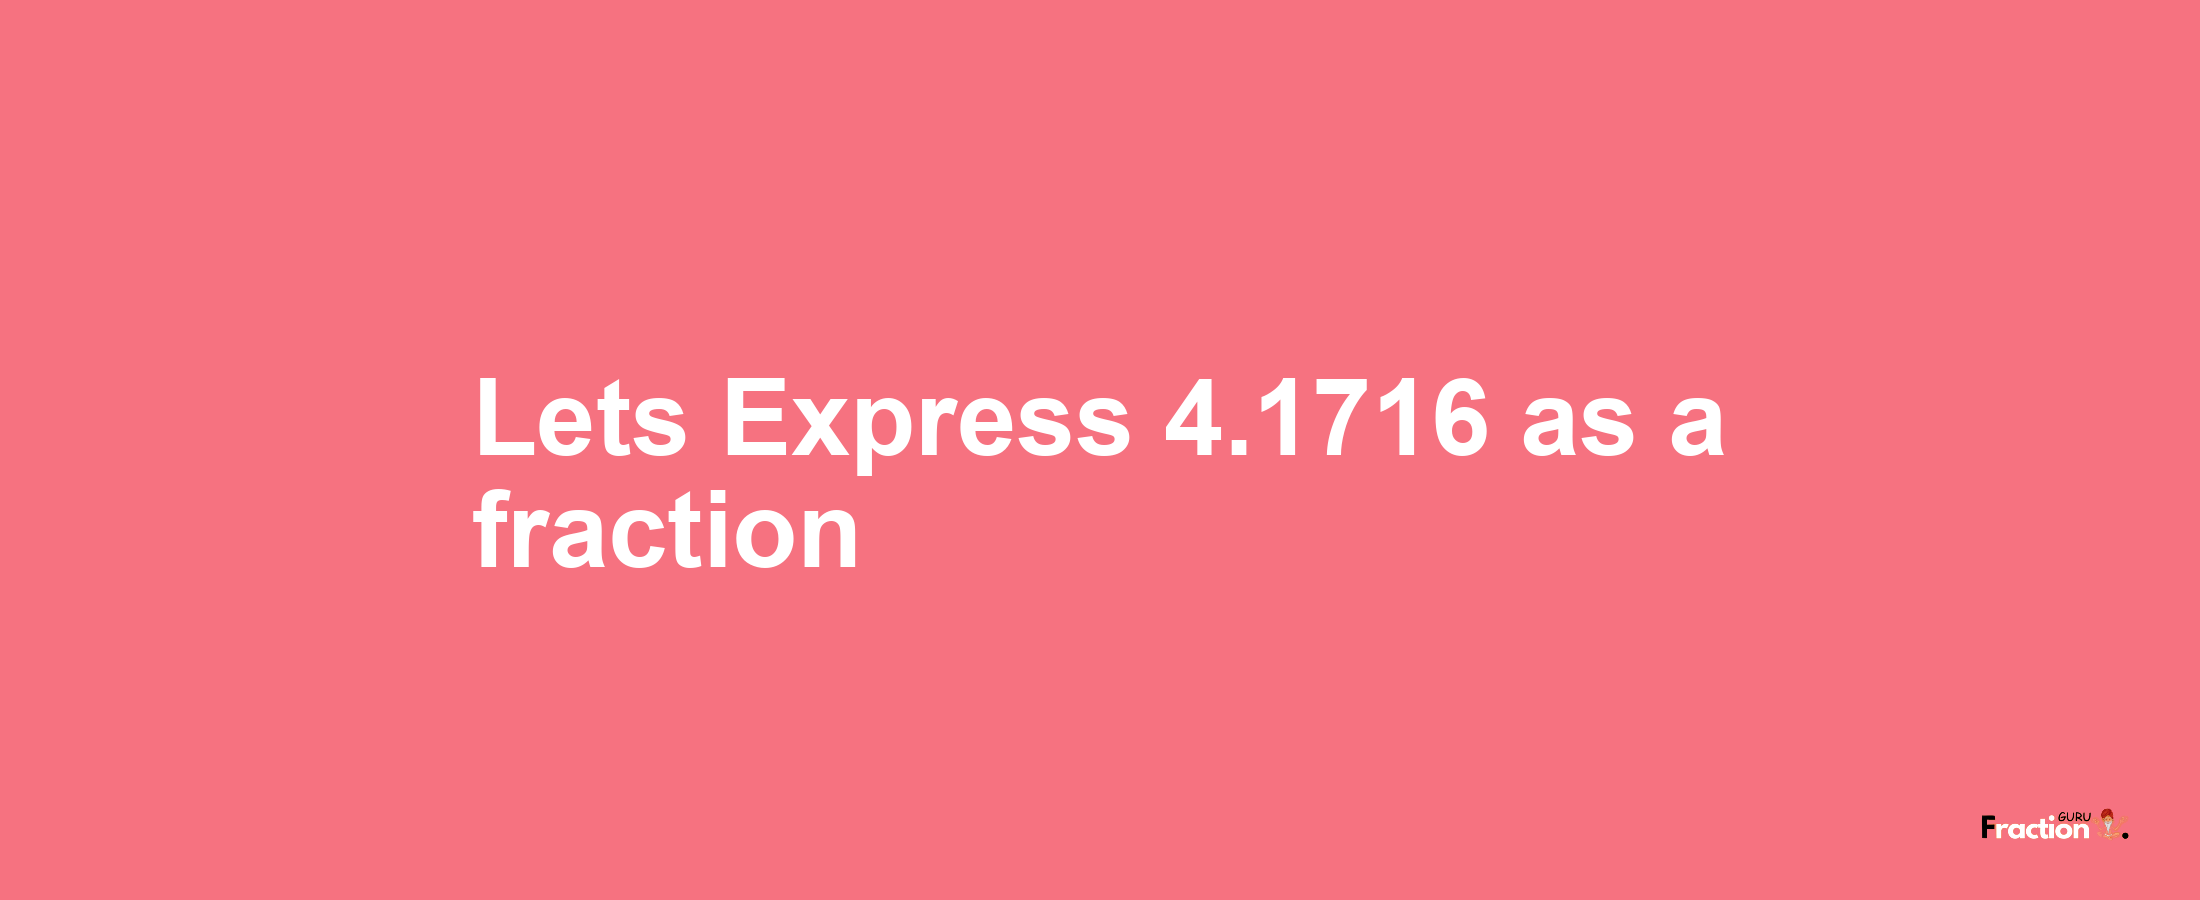 Lets Express 4.1716 as afraction